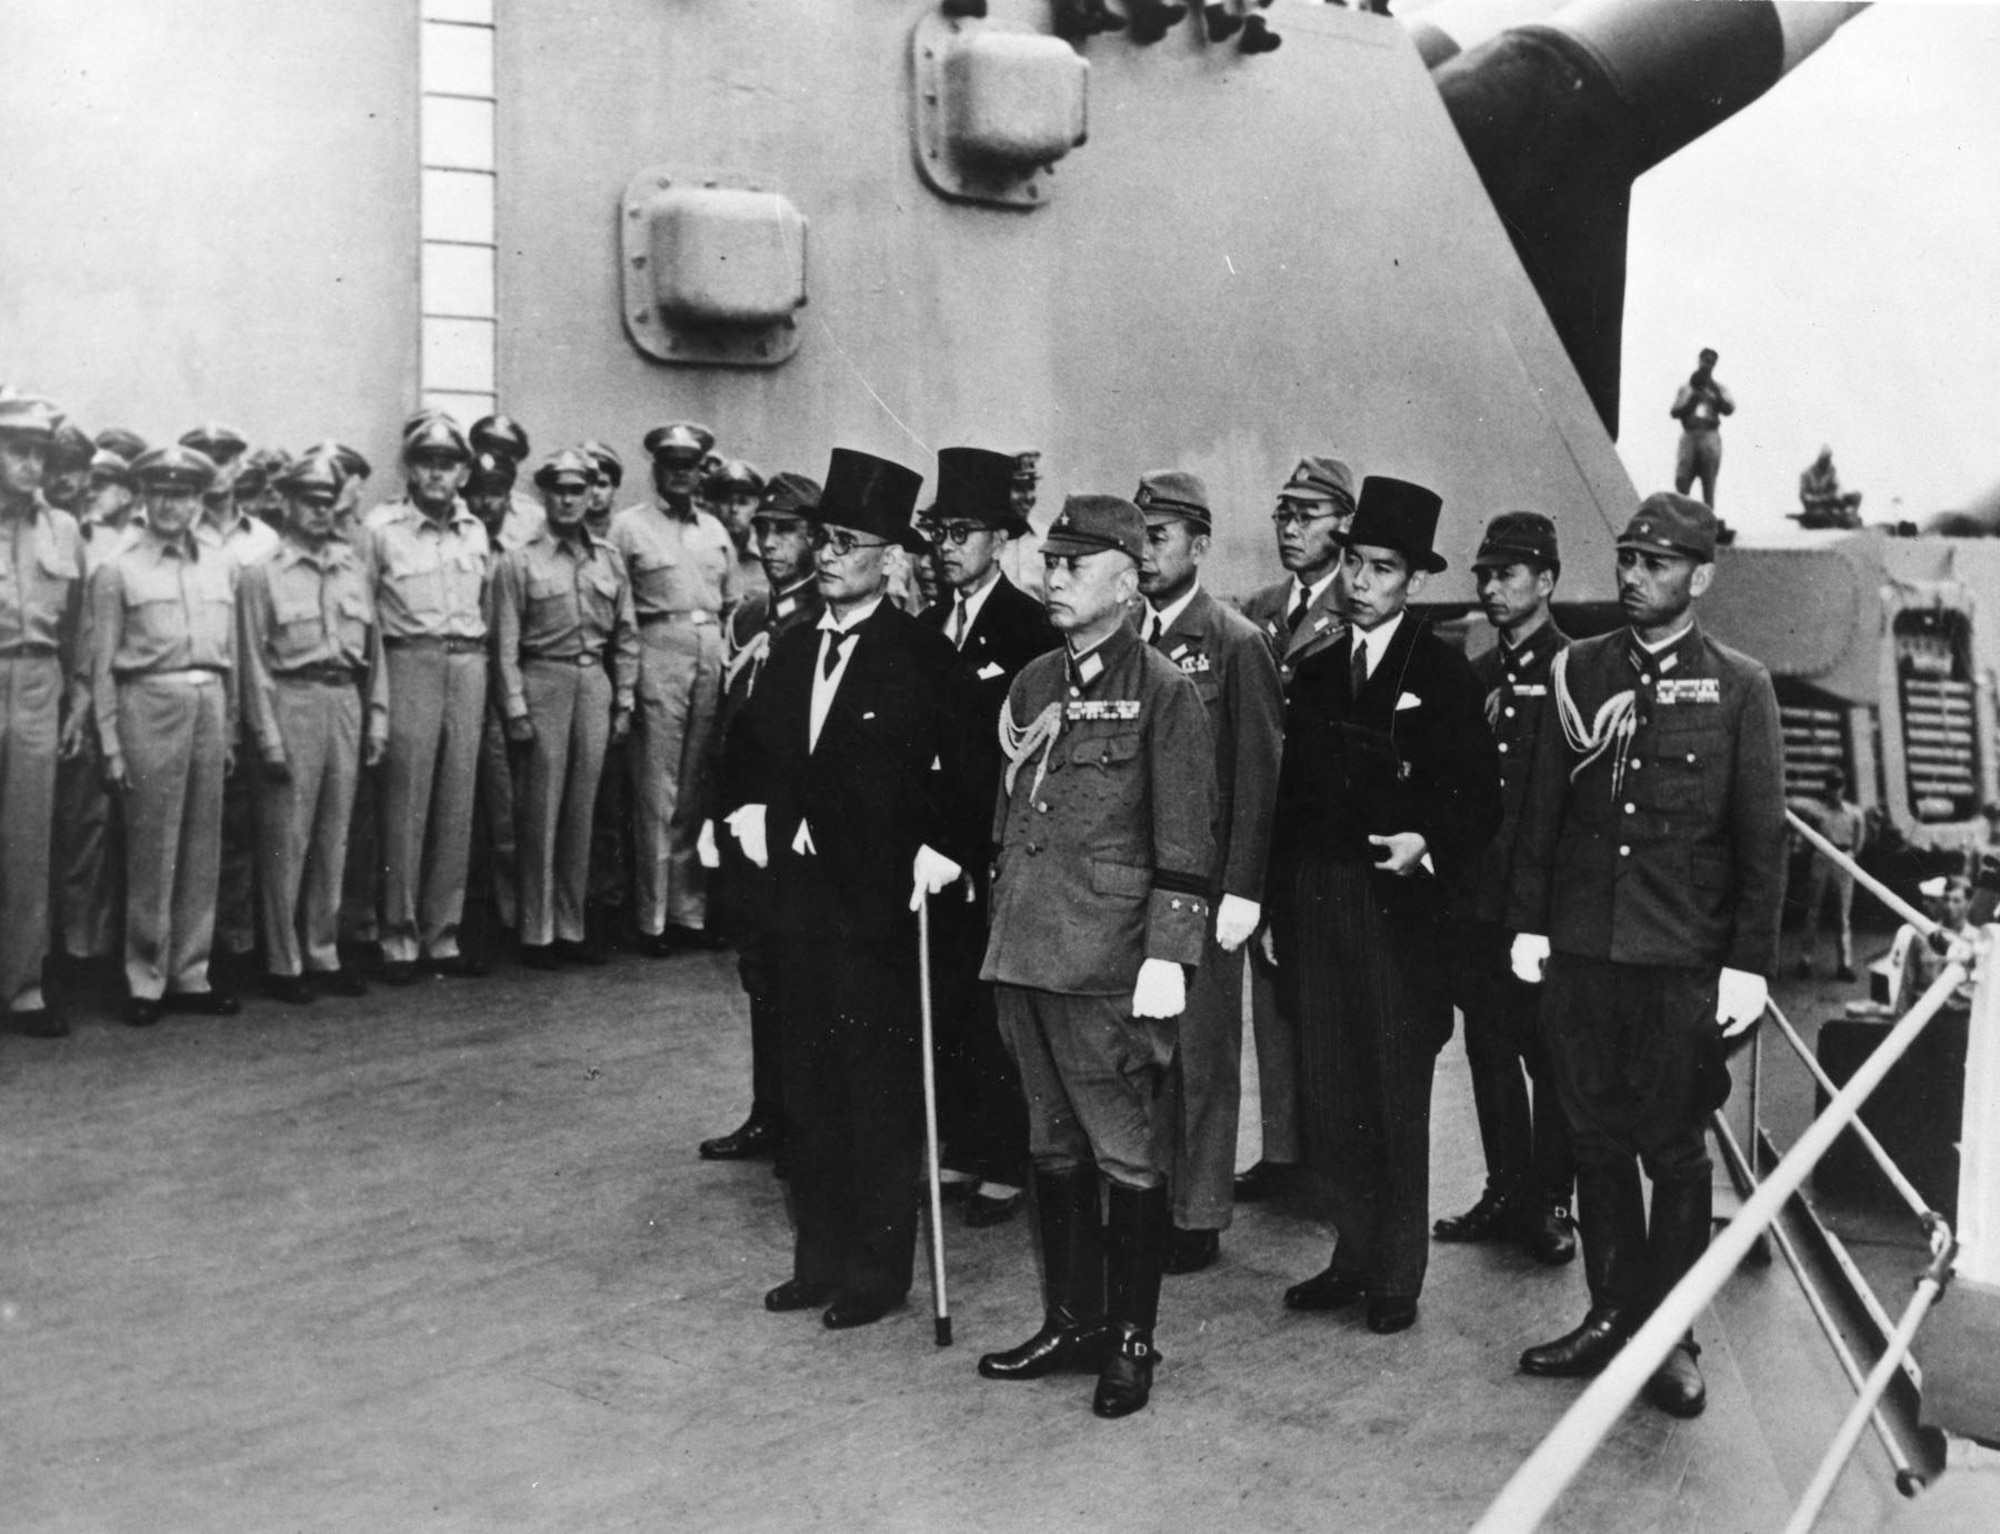 Japanese representatives on board the USS Missouri in Tokyo Bay to participate in formal surrender ceremonies on Sept. 2, 1945. (U.S. Air Force photo)